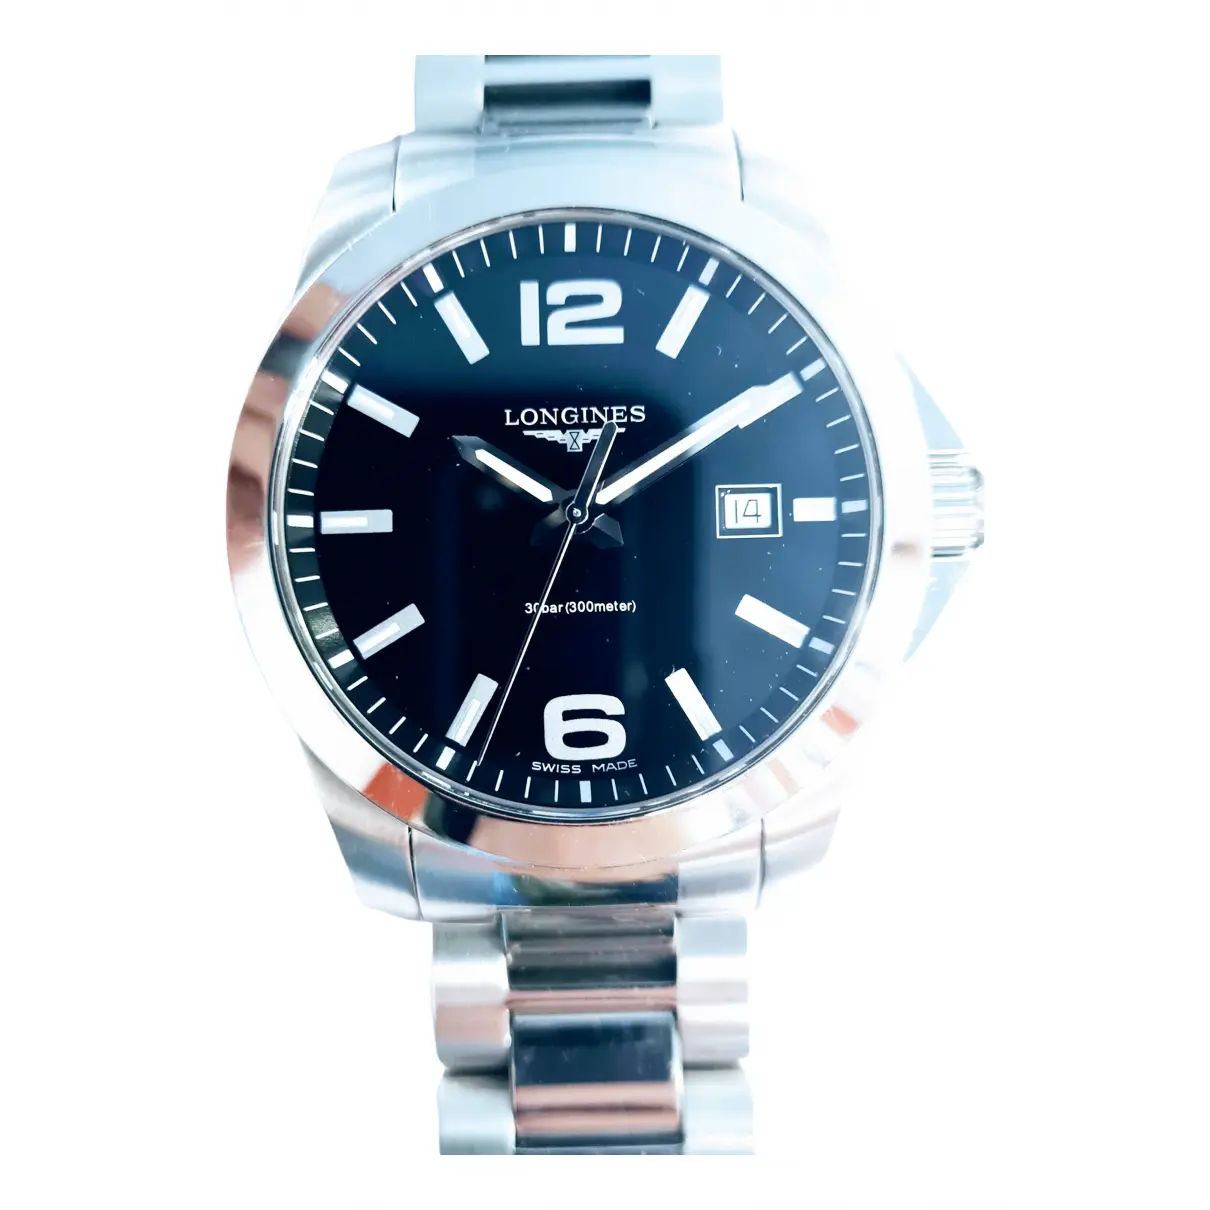 Conquest watch Longines